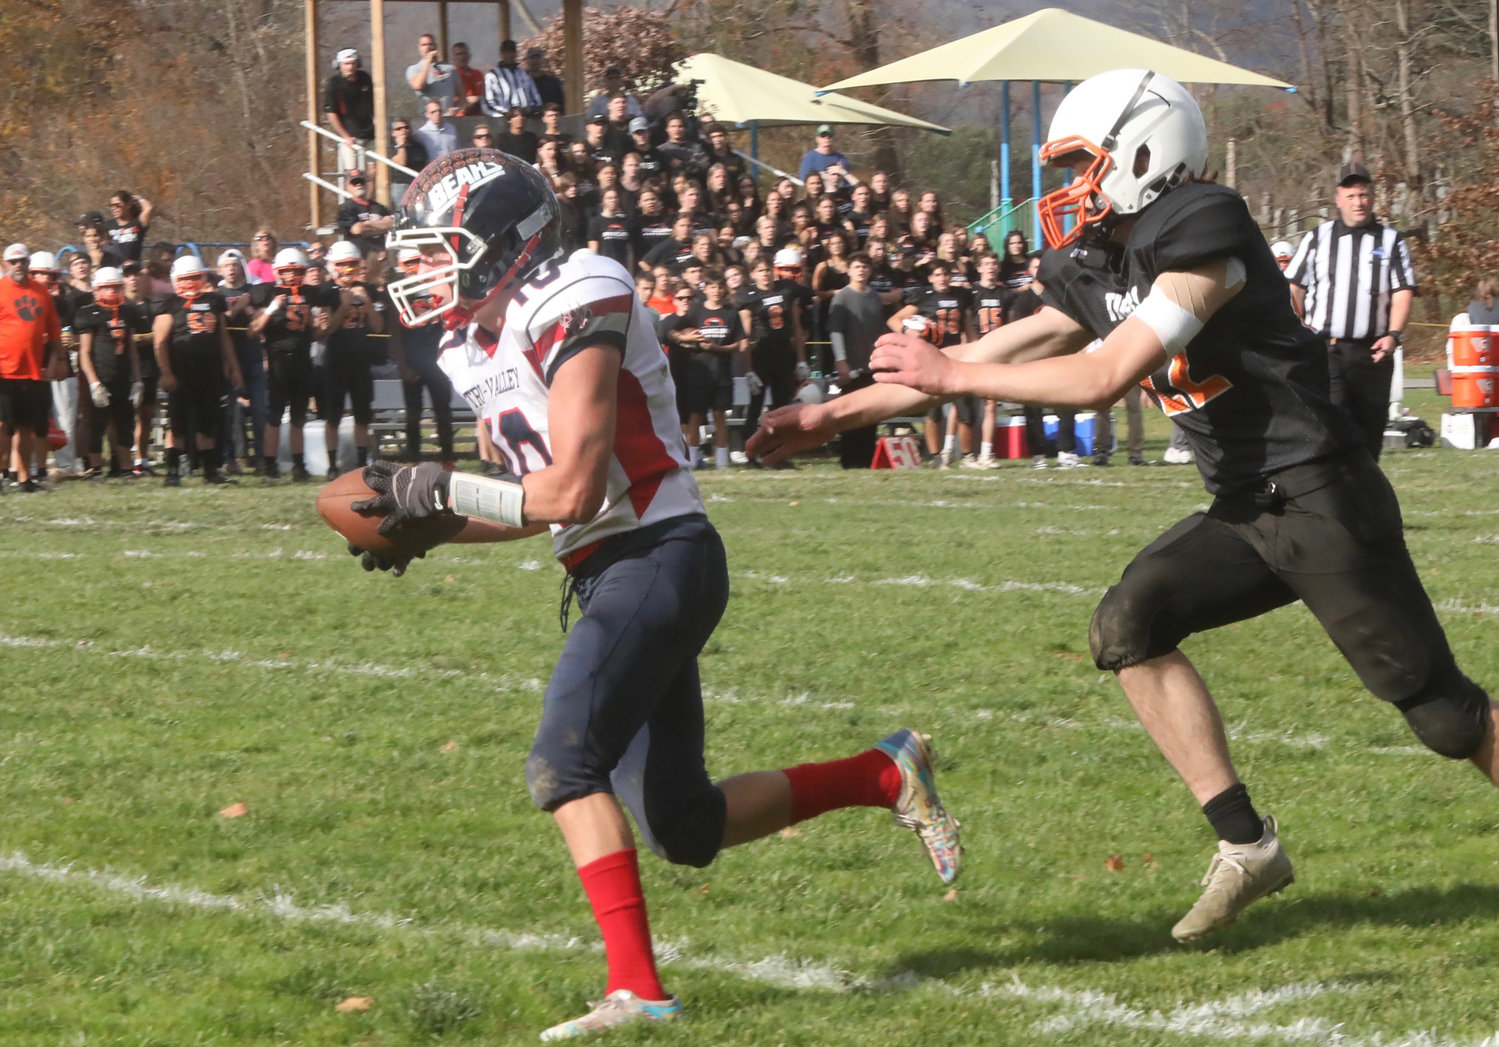 Zach Kitaychik outruns a Pawling defender for a 45-yard TD on a pass from Austin Hartman in the waning seconds of the first half to bring T-V within two points at 20-18.